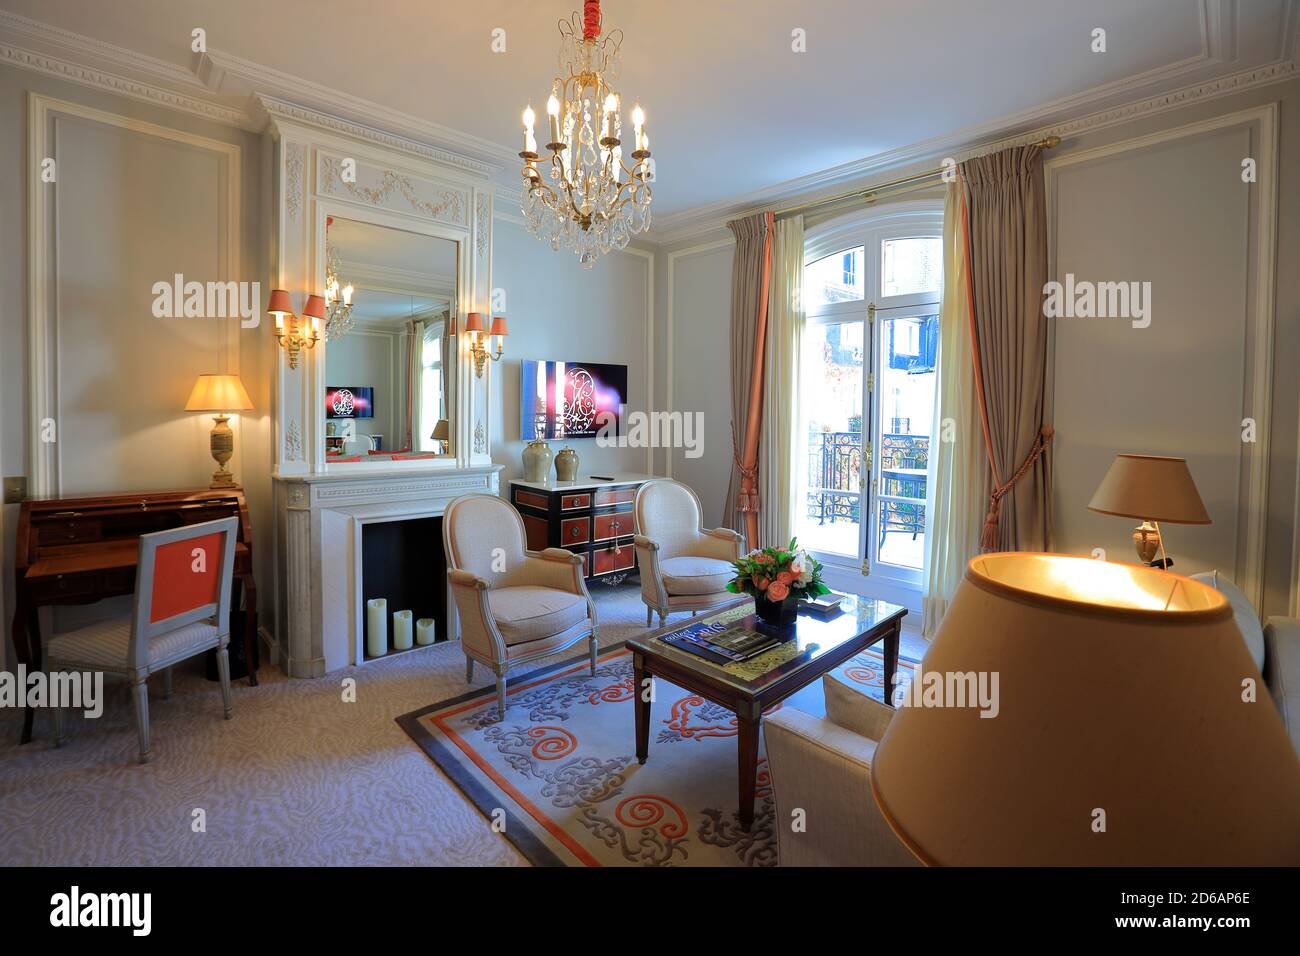 The interior view of the living room of the suite in Hotel Plaza Athénée the historic landmark hotel in Avenue Montaigne.Paris.France Stock Photo